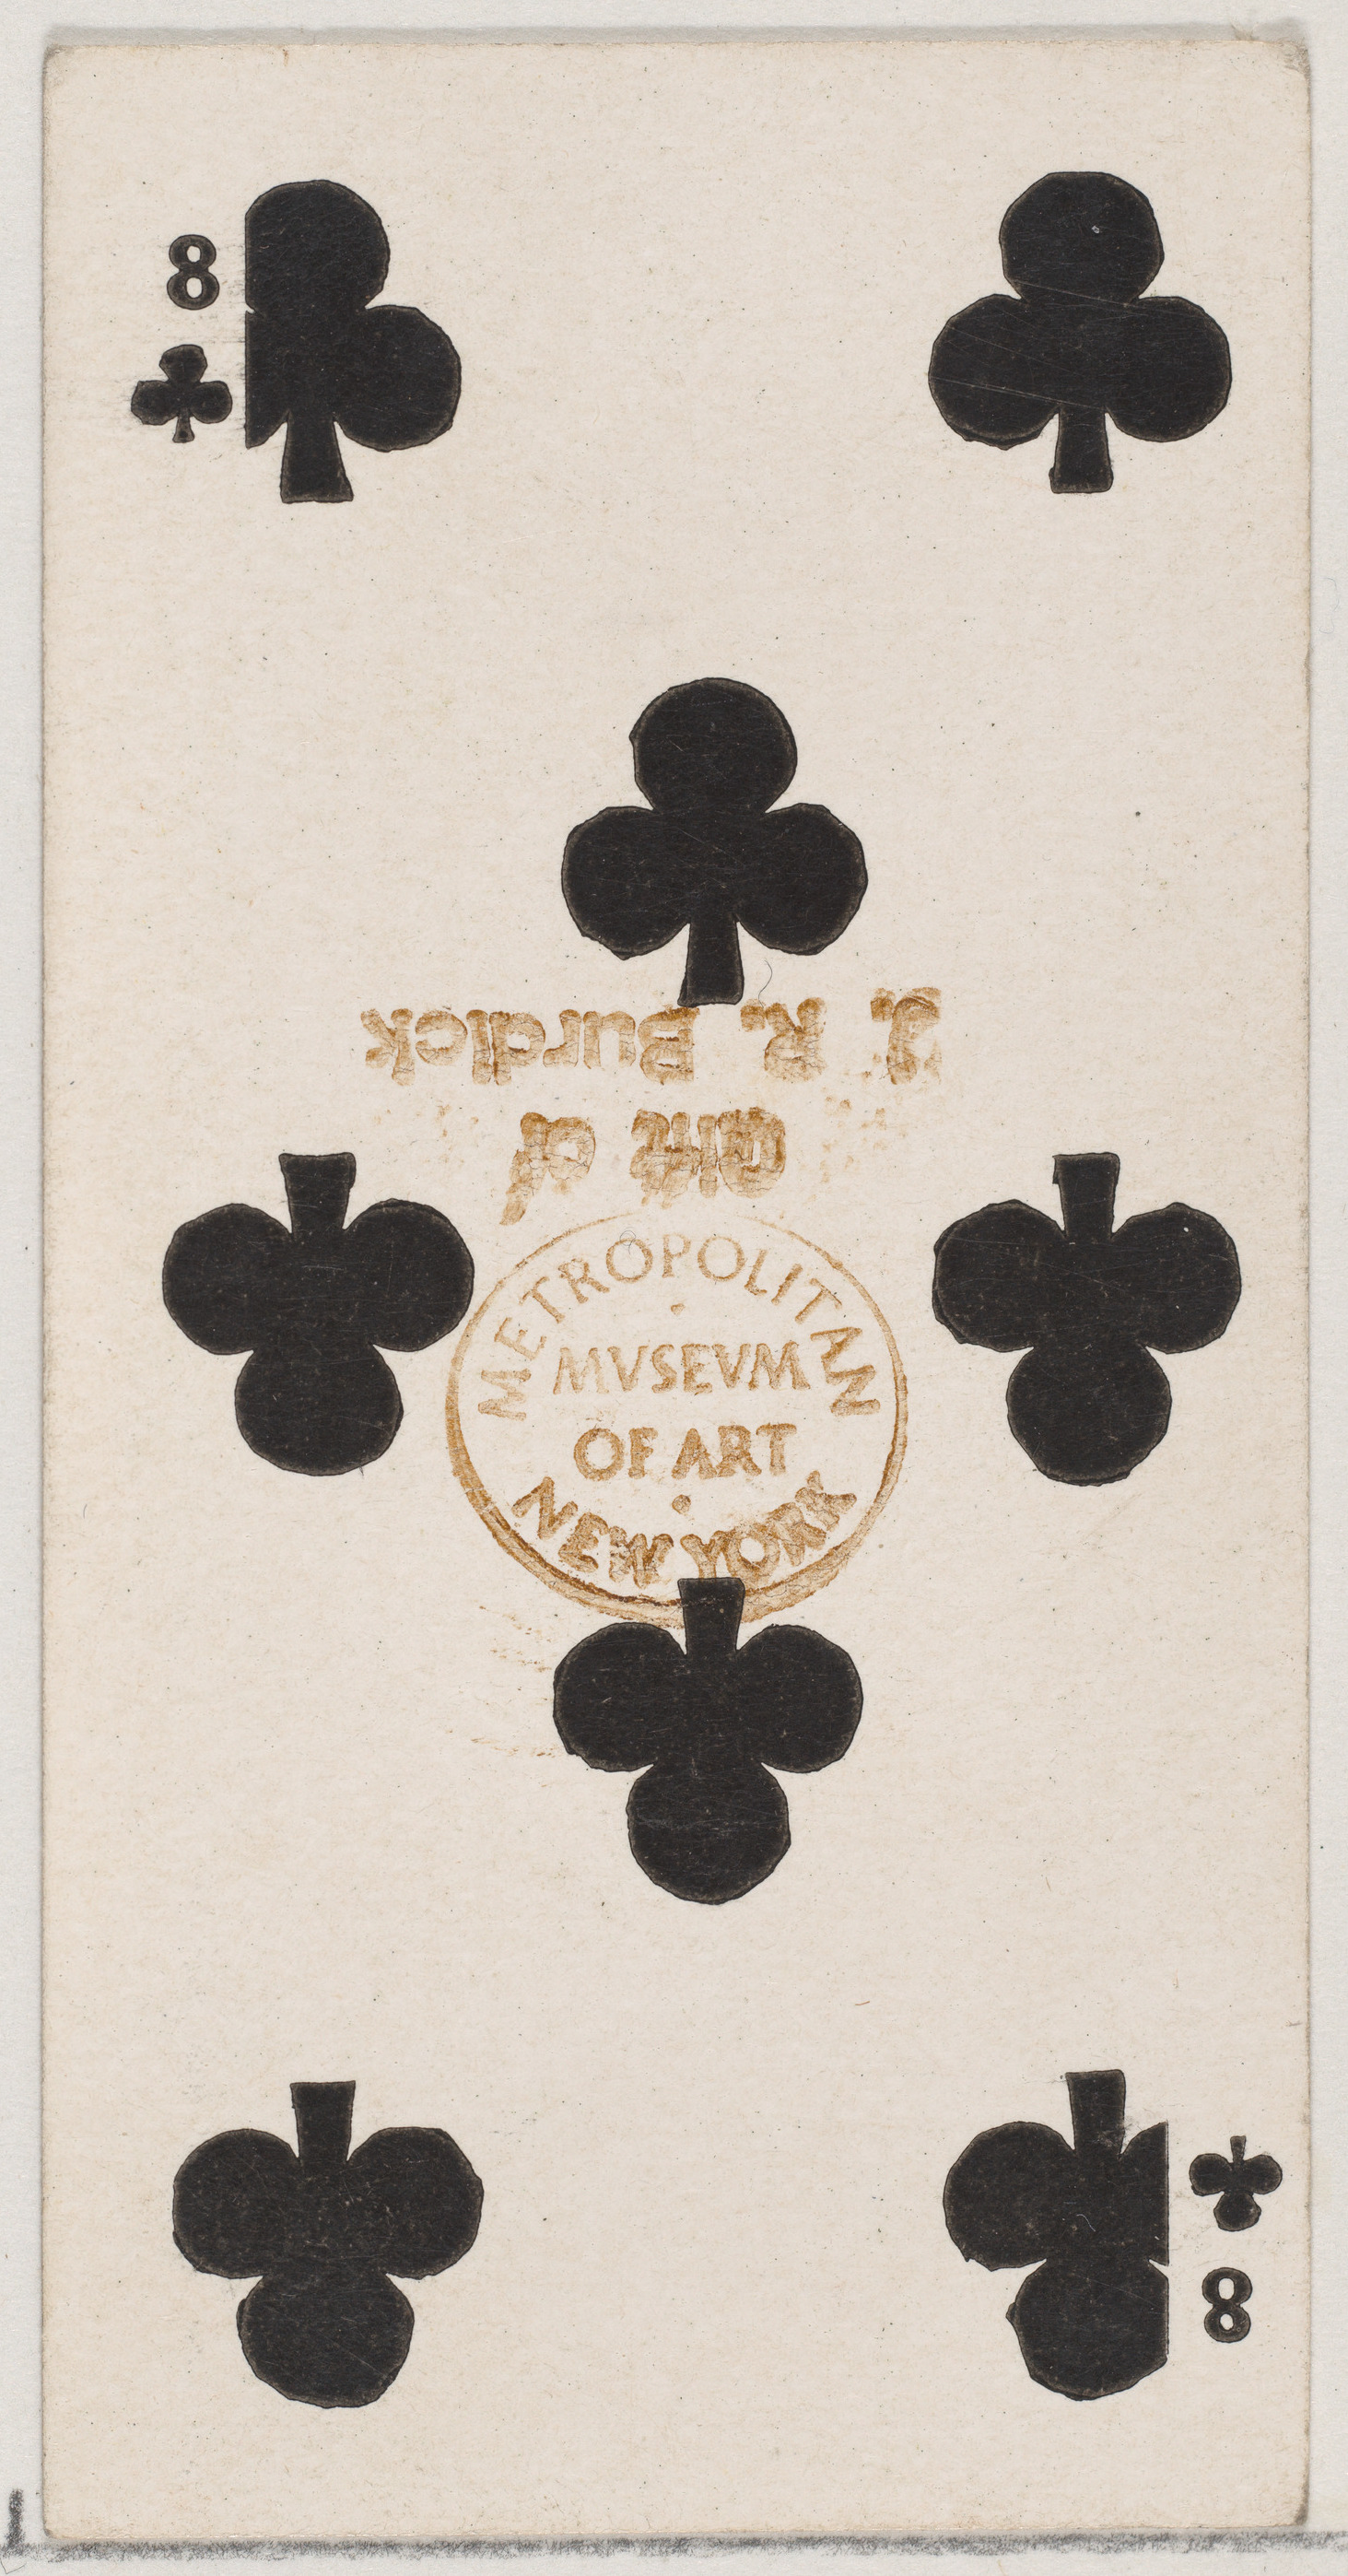 Issued By W Duke Sons Co Eight Clubs Black From The Playing Cards Series N84 For Duke Brand Cigarettes The Metropolitan Museum Of Art